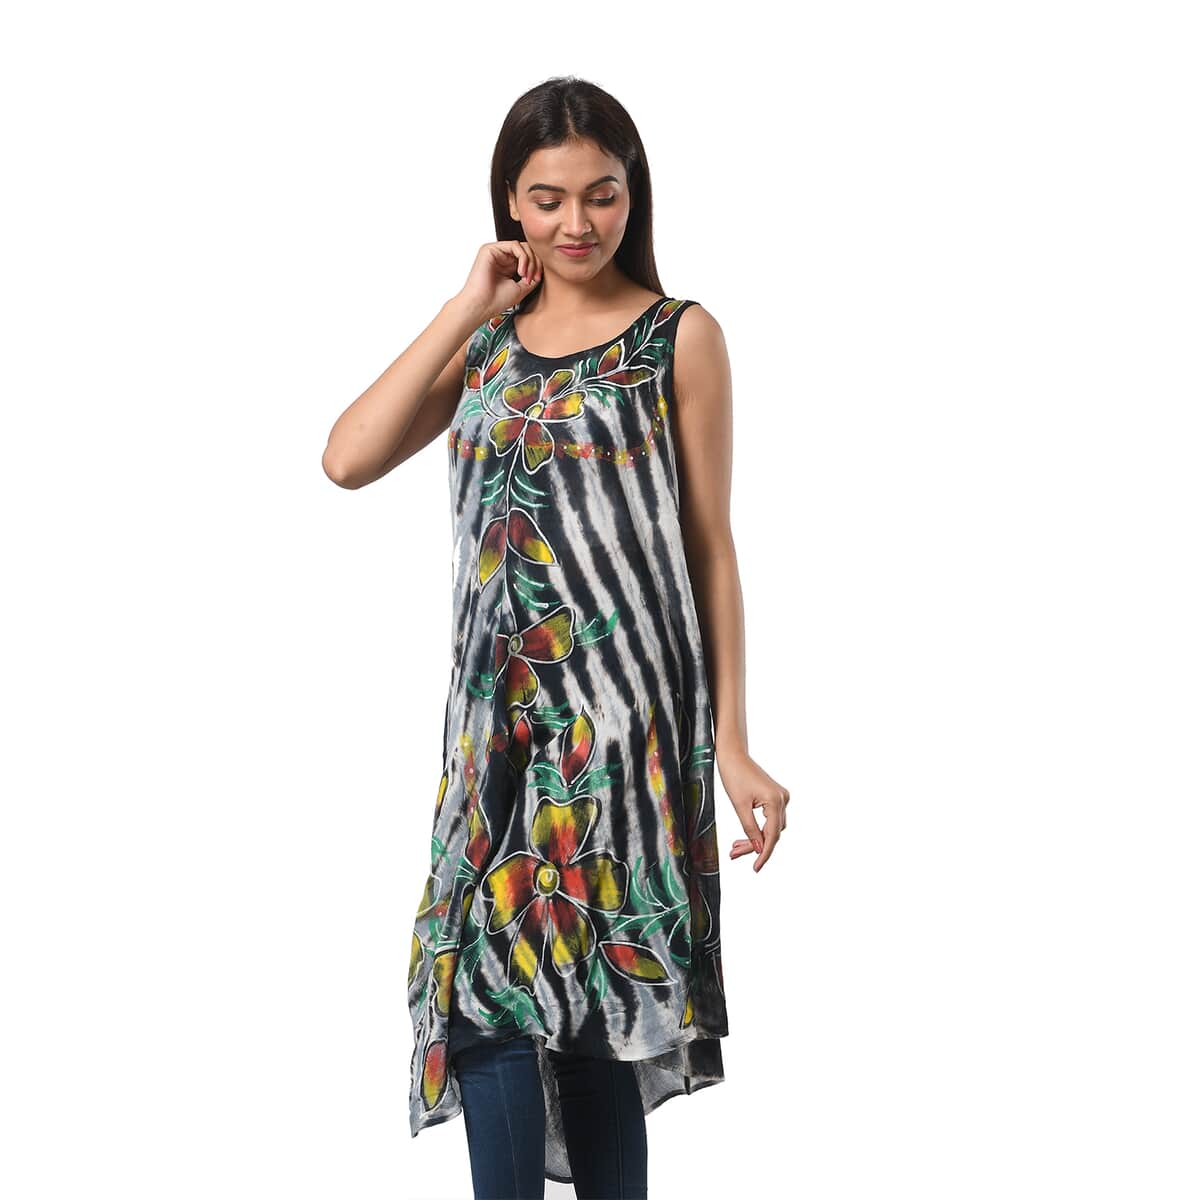 JOVIE Black Stripe Tie Dye with Floral Umbrella Dress - One Size Fits Most image number 3